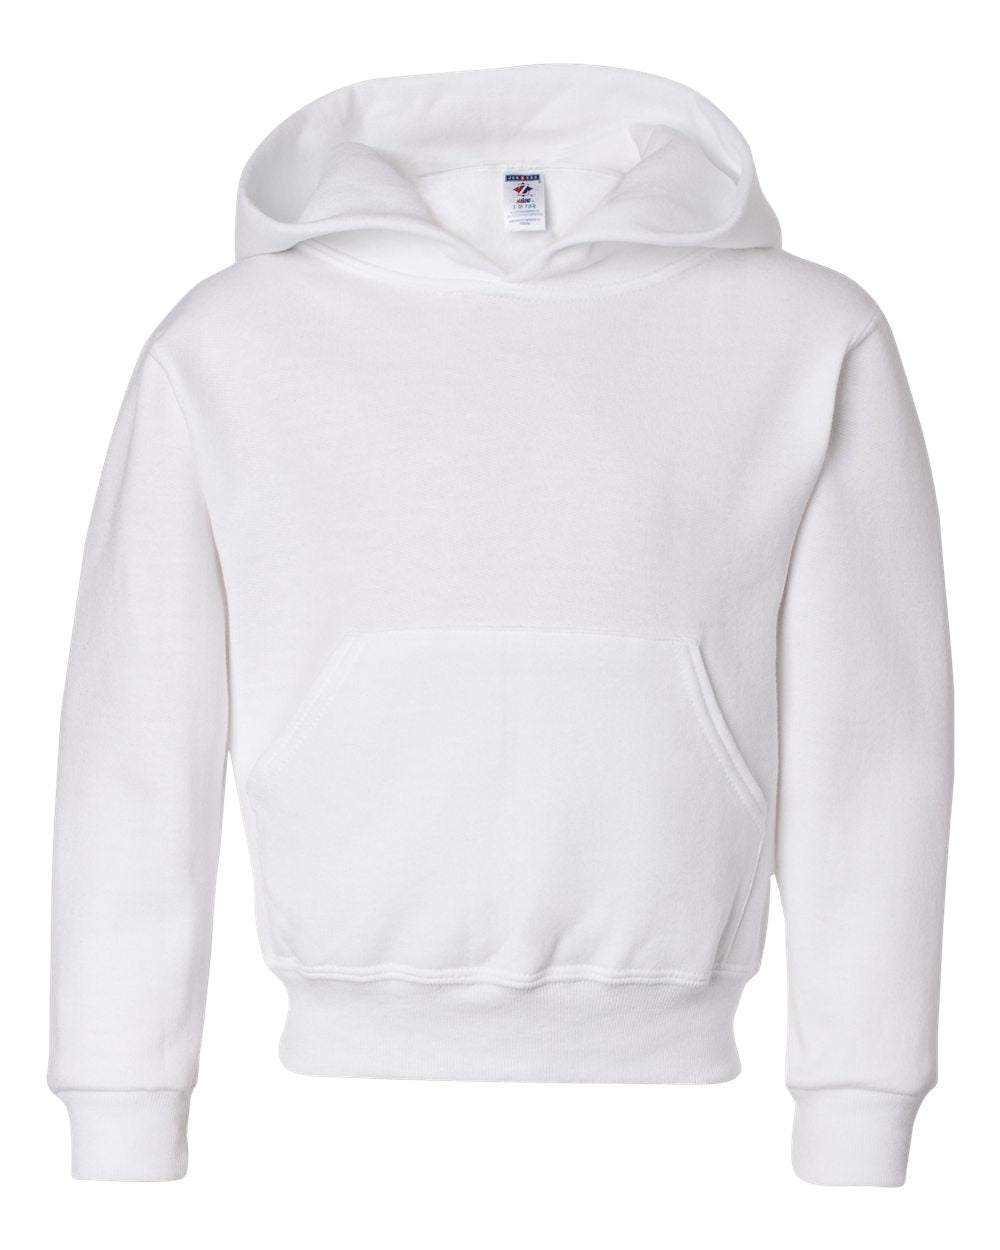 Jerzees Youth Hoodie (996YR) in White